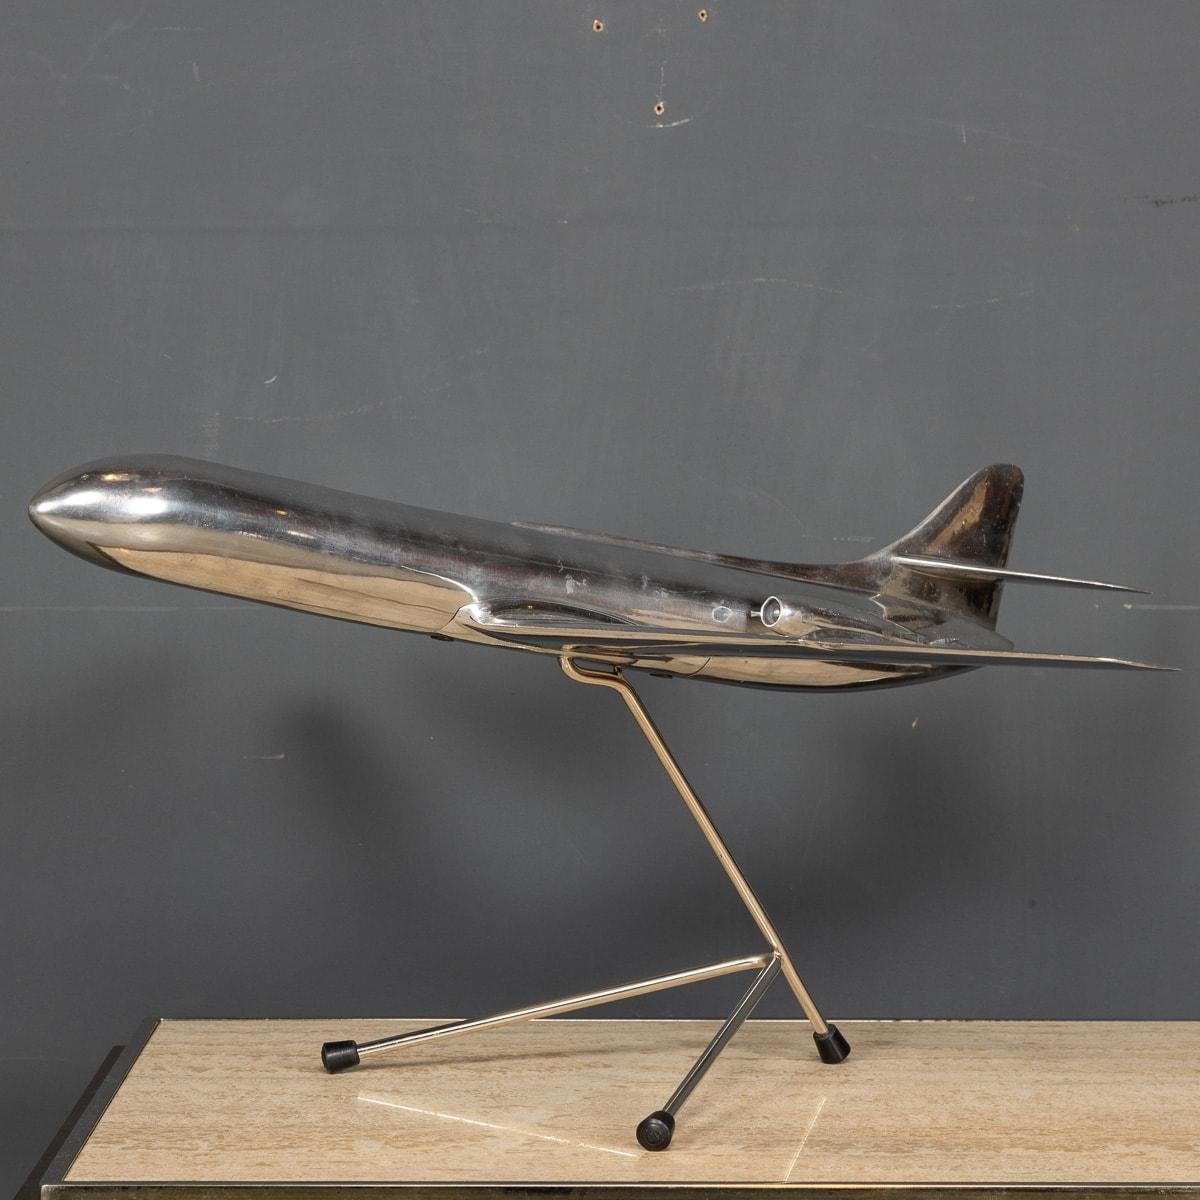 A Stunning mid-20th century polished metal model of a late 1950’s Sud Aviation SE 210 Caravelle on a polished metal stand.


Condition
In Great condition - No damage, just general wear.

Size
Height: 37cm
Width: 64cm
Depth: 73cm.